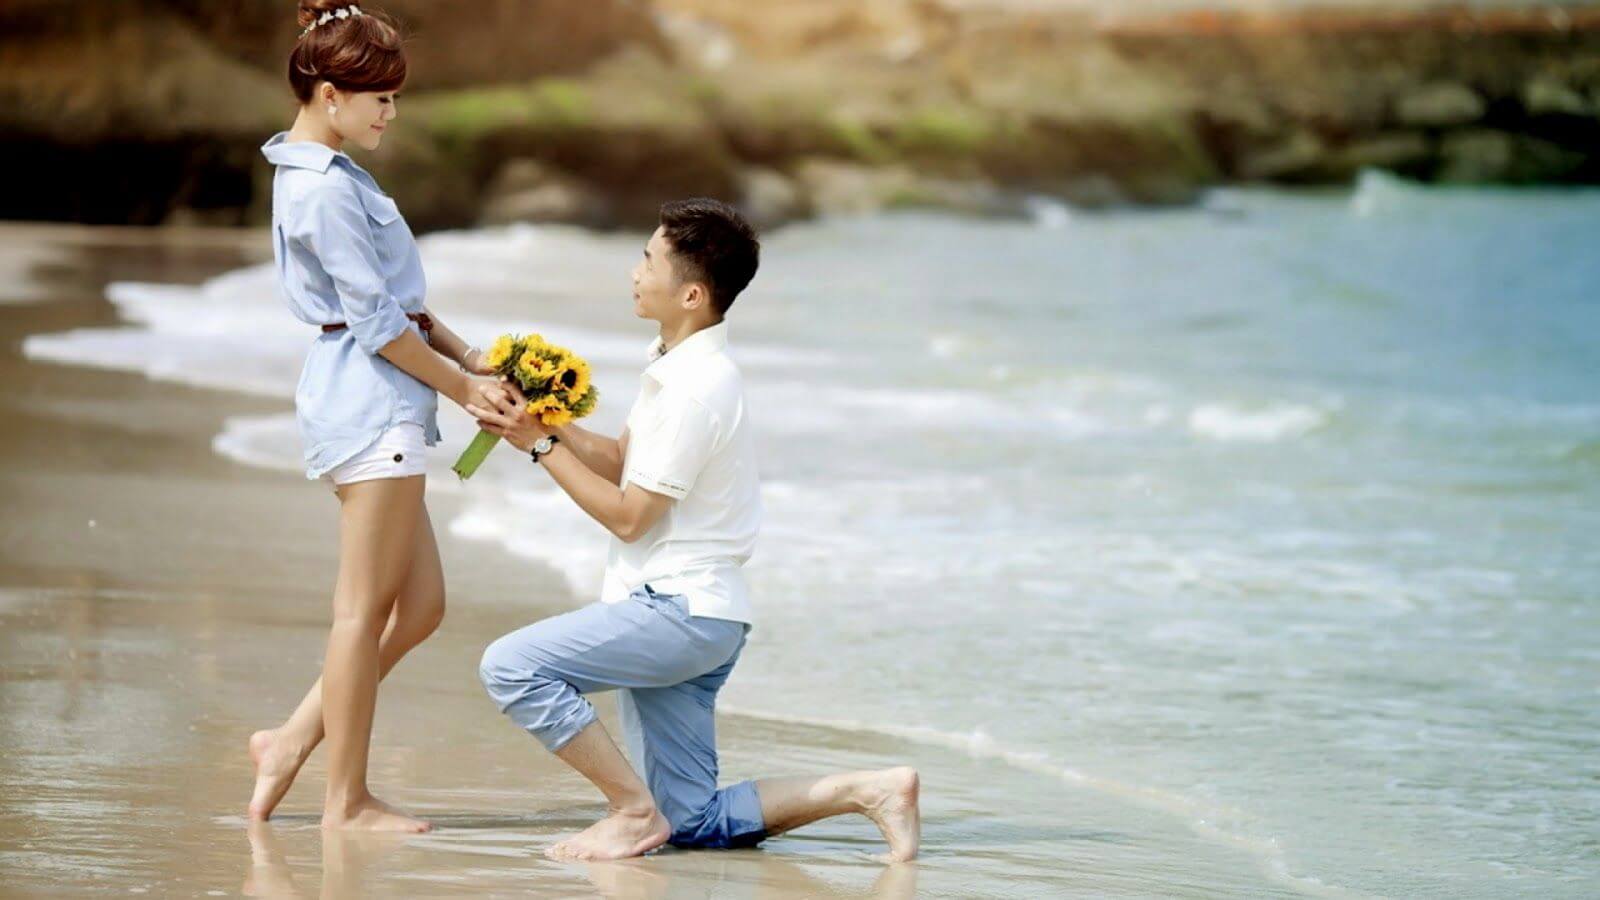 Propose Day Wallpaper HD Free Download Now!!!